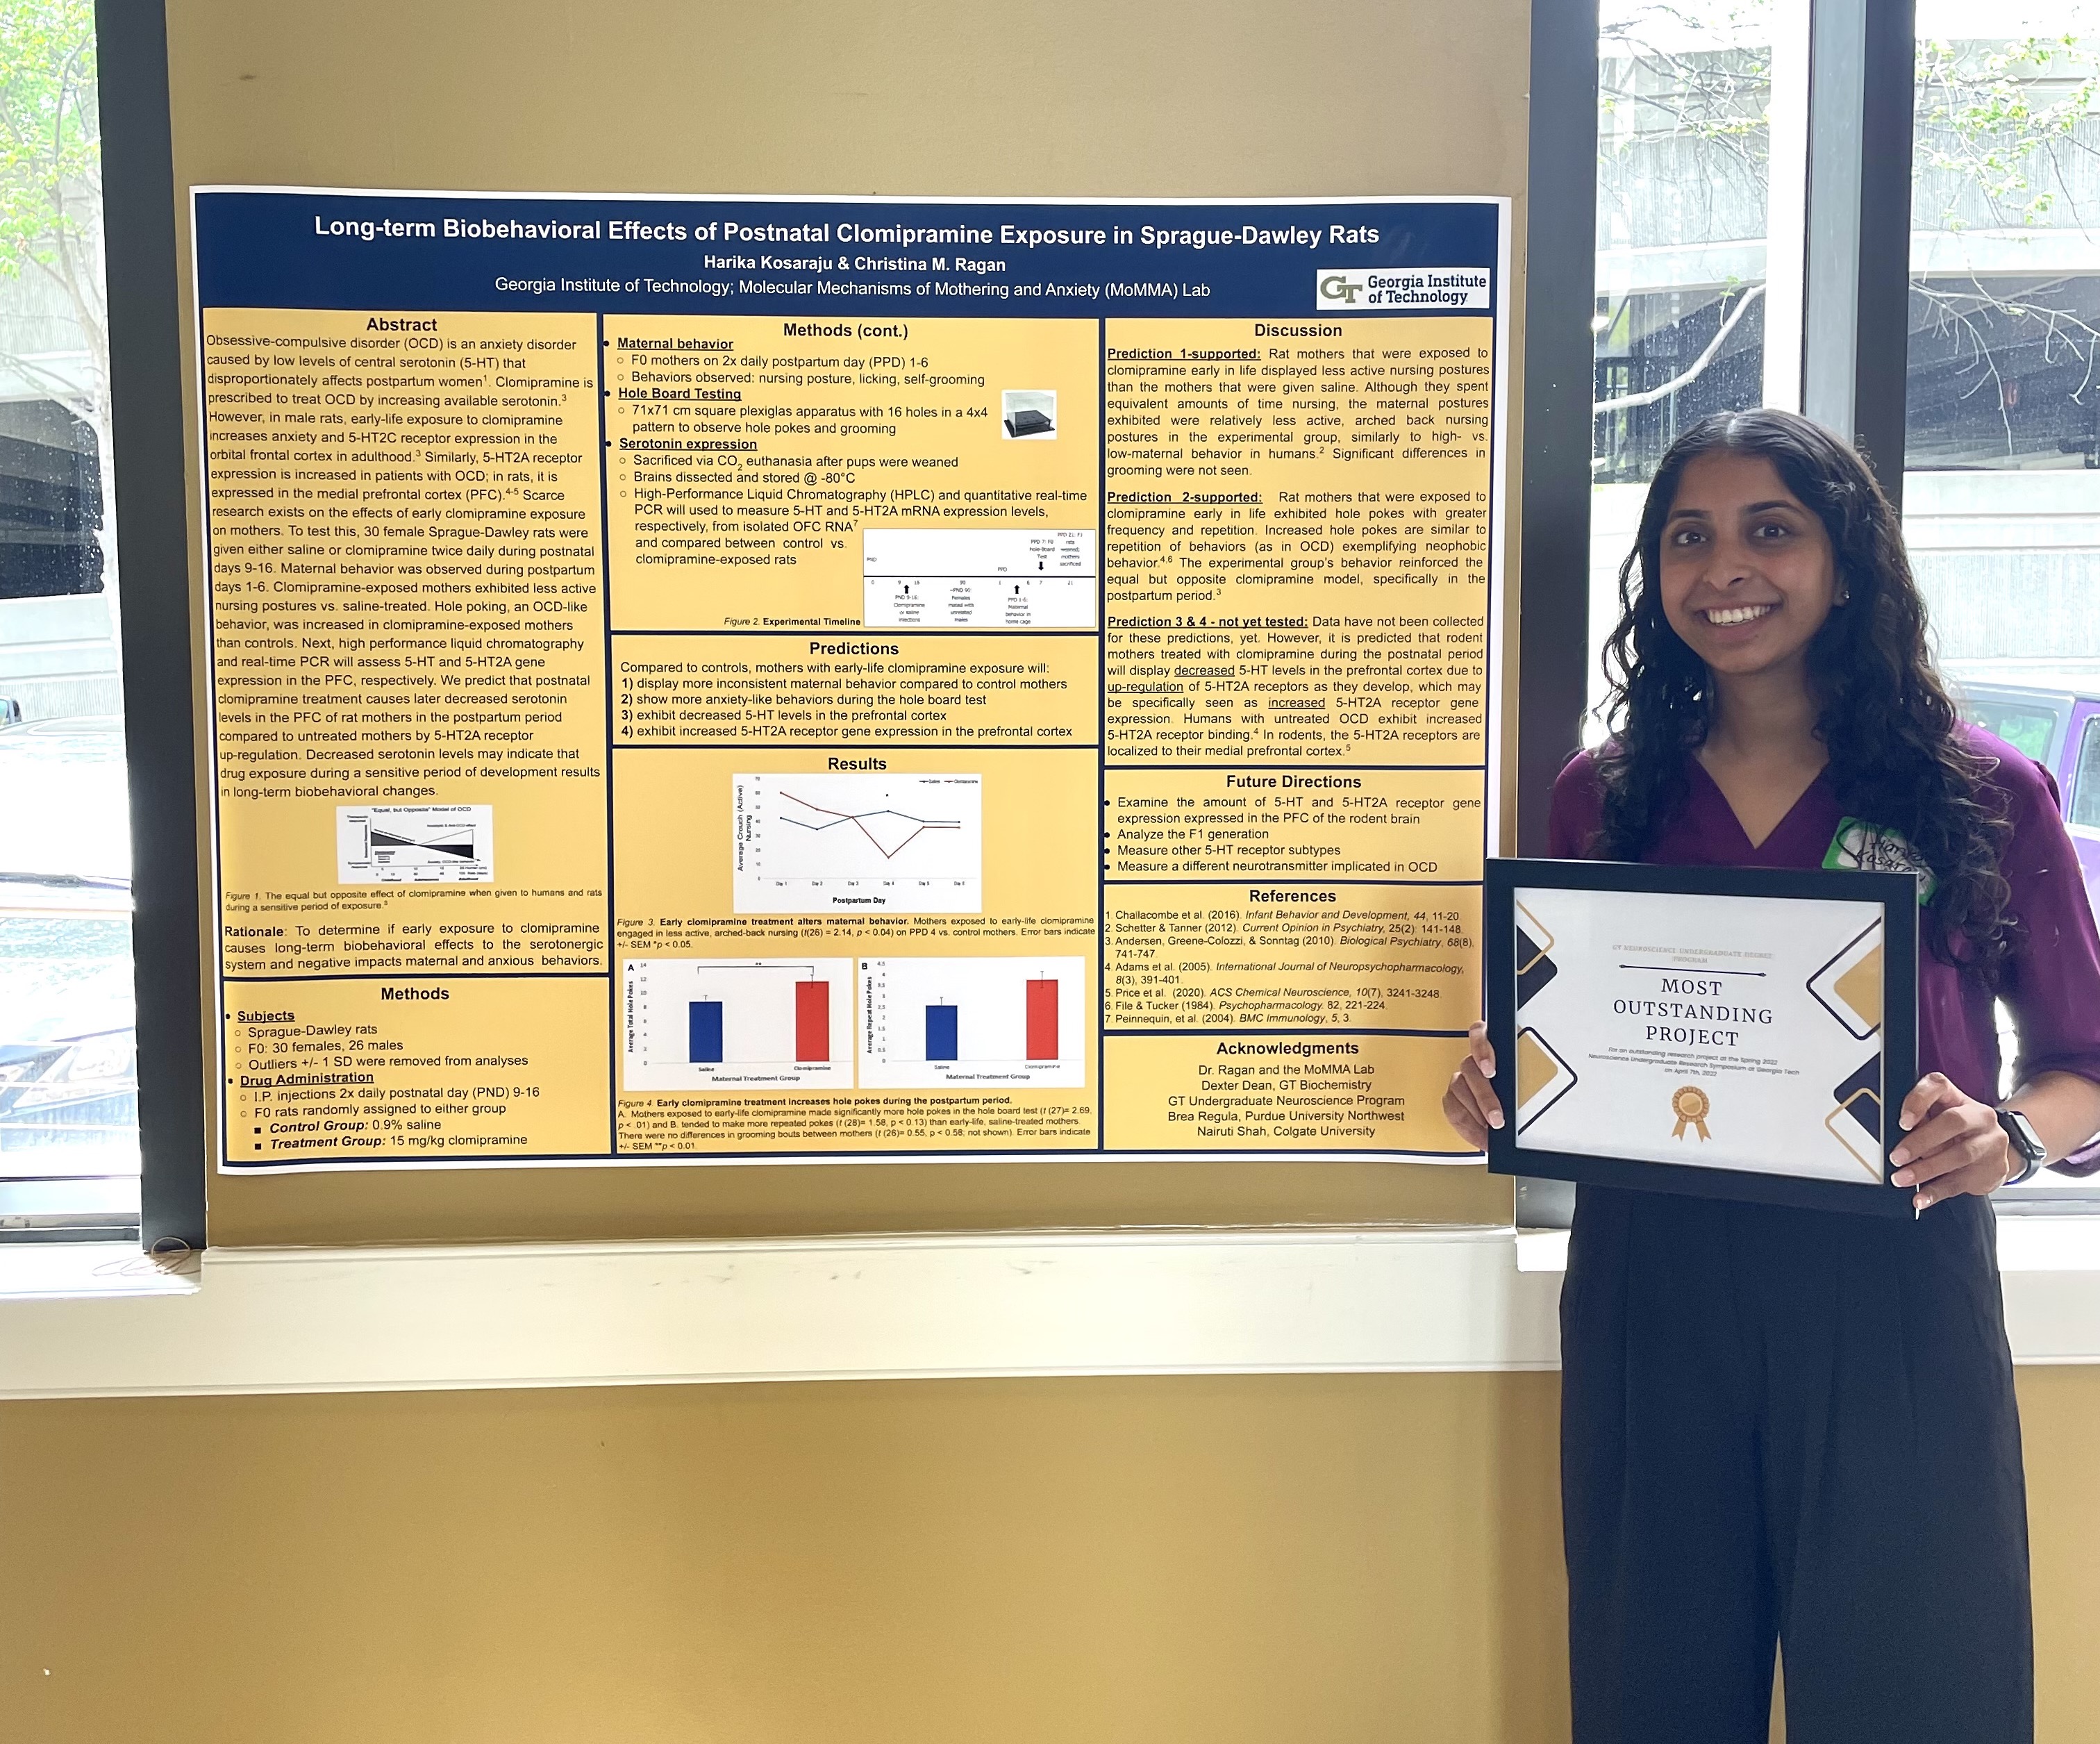 Harika Kosaraju presenting her behavioral work on OCD and motherhood after exposure to clomipramine at a conference.